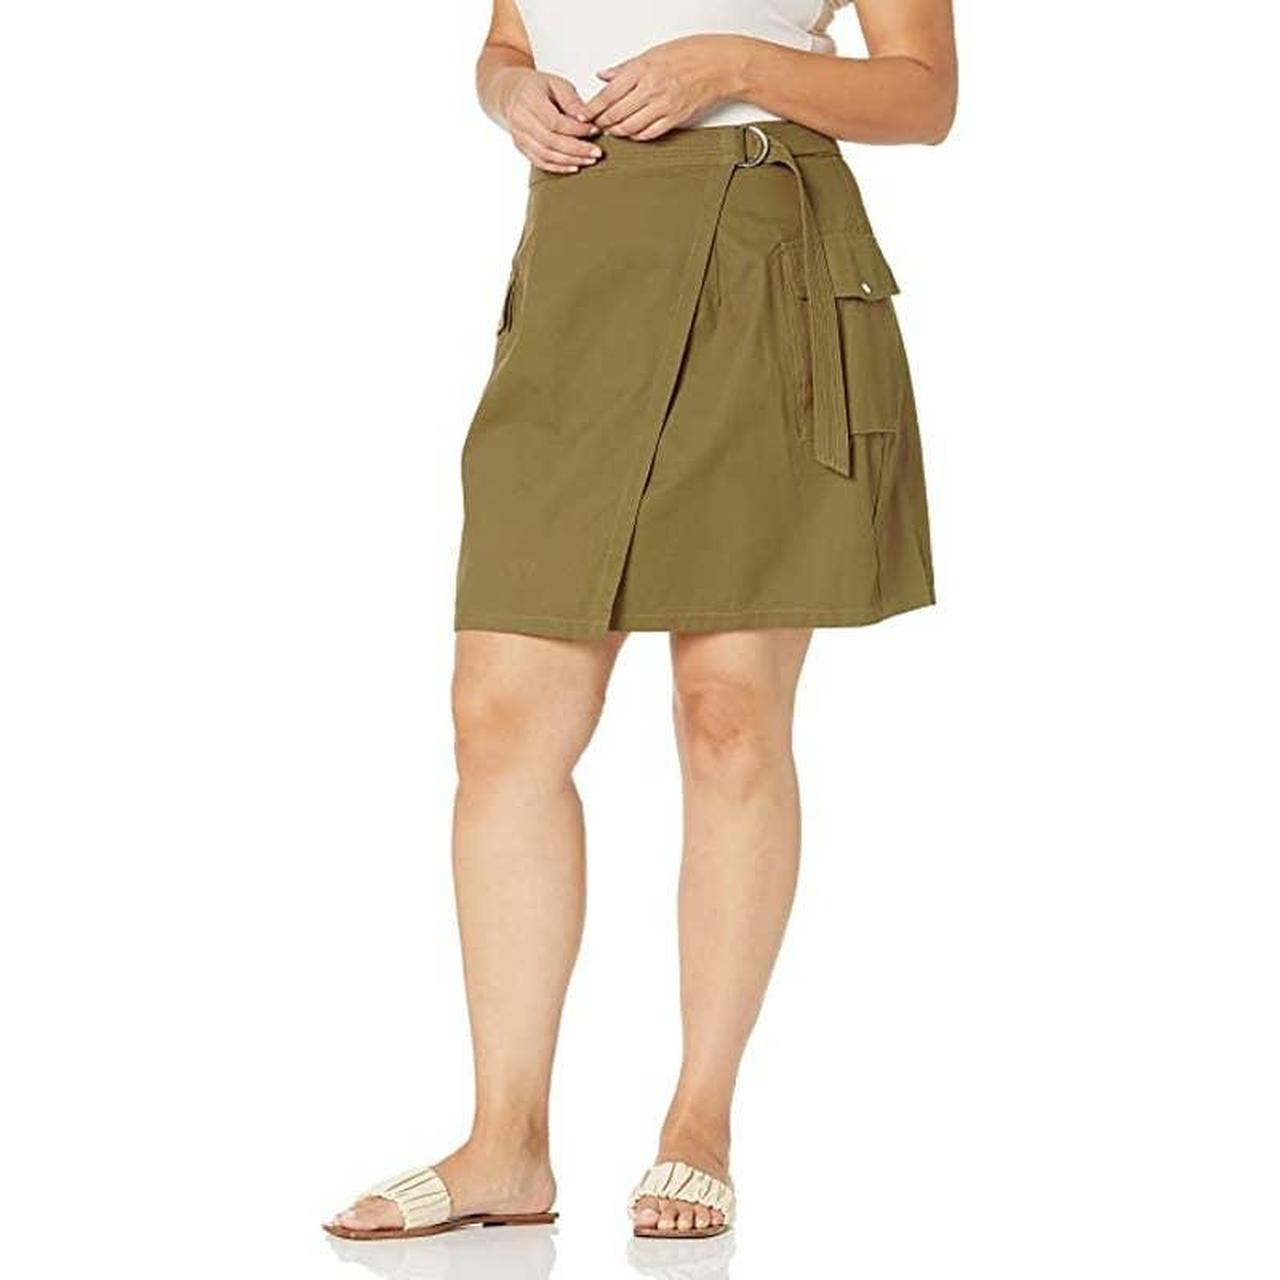 Product Image 1 - City Chic
Khaki
Green in color
High waisted
Pockets
Belted
Above